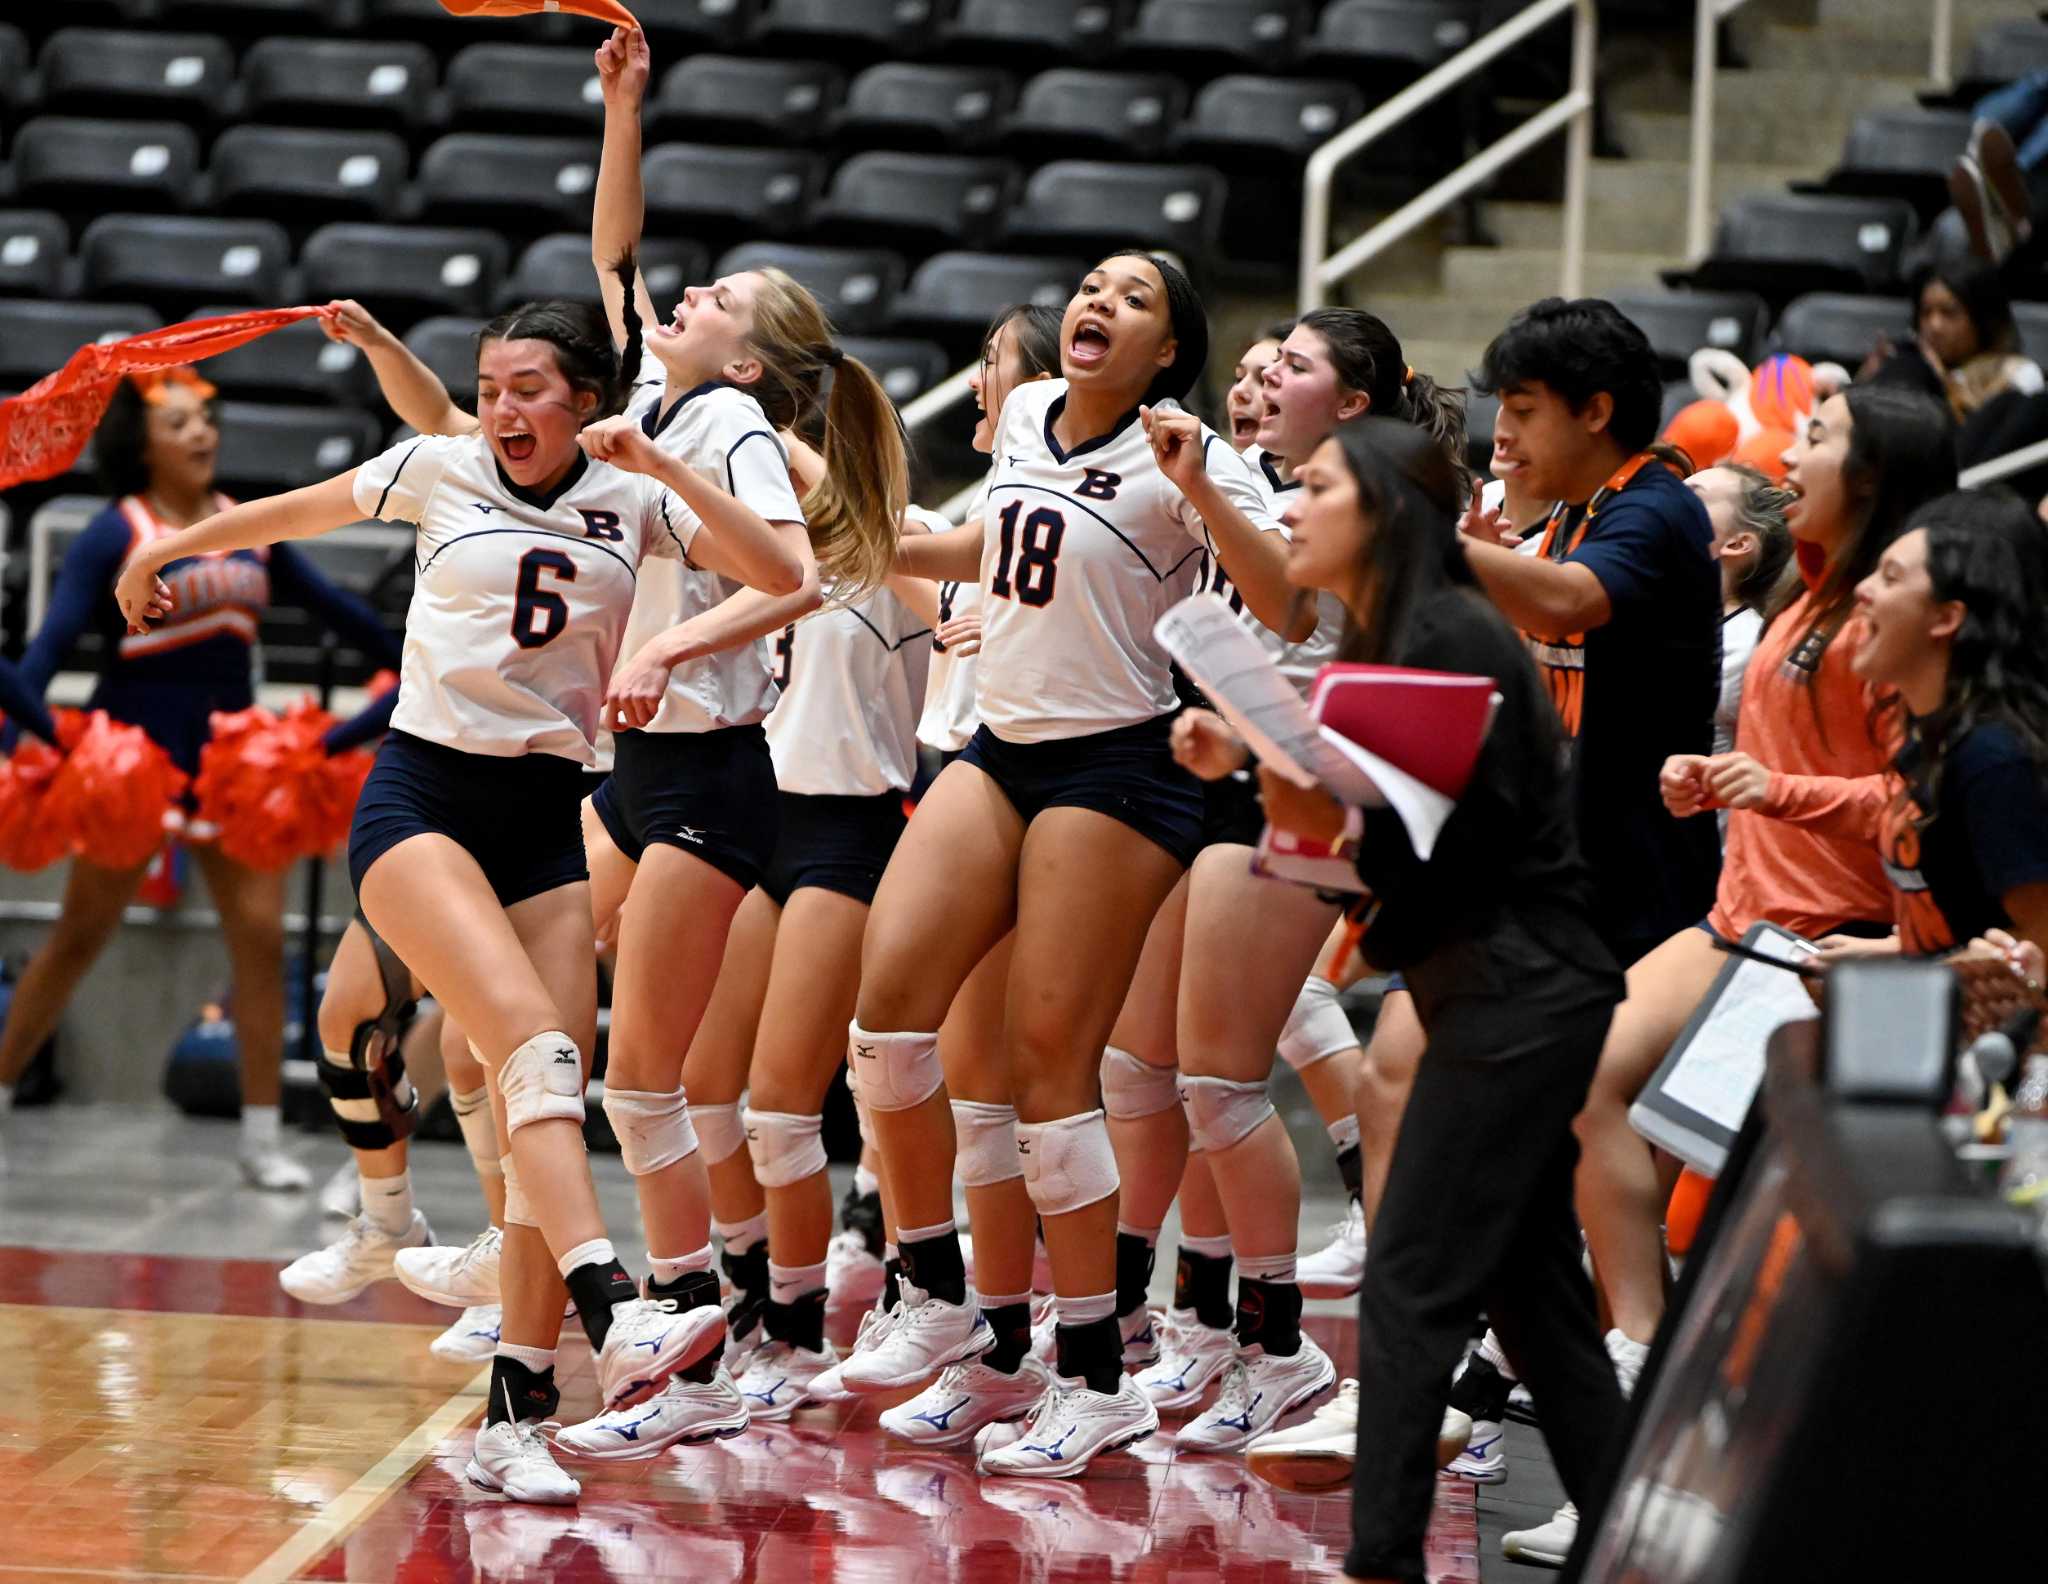 Brandeis moves into the 6A state volleyball final